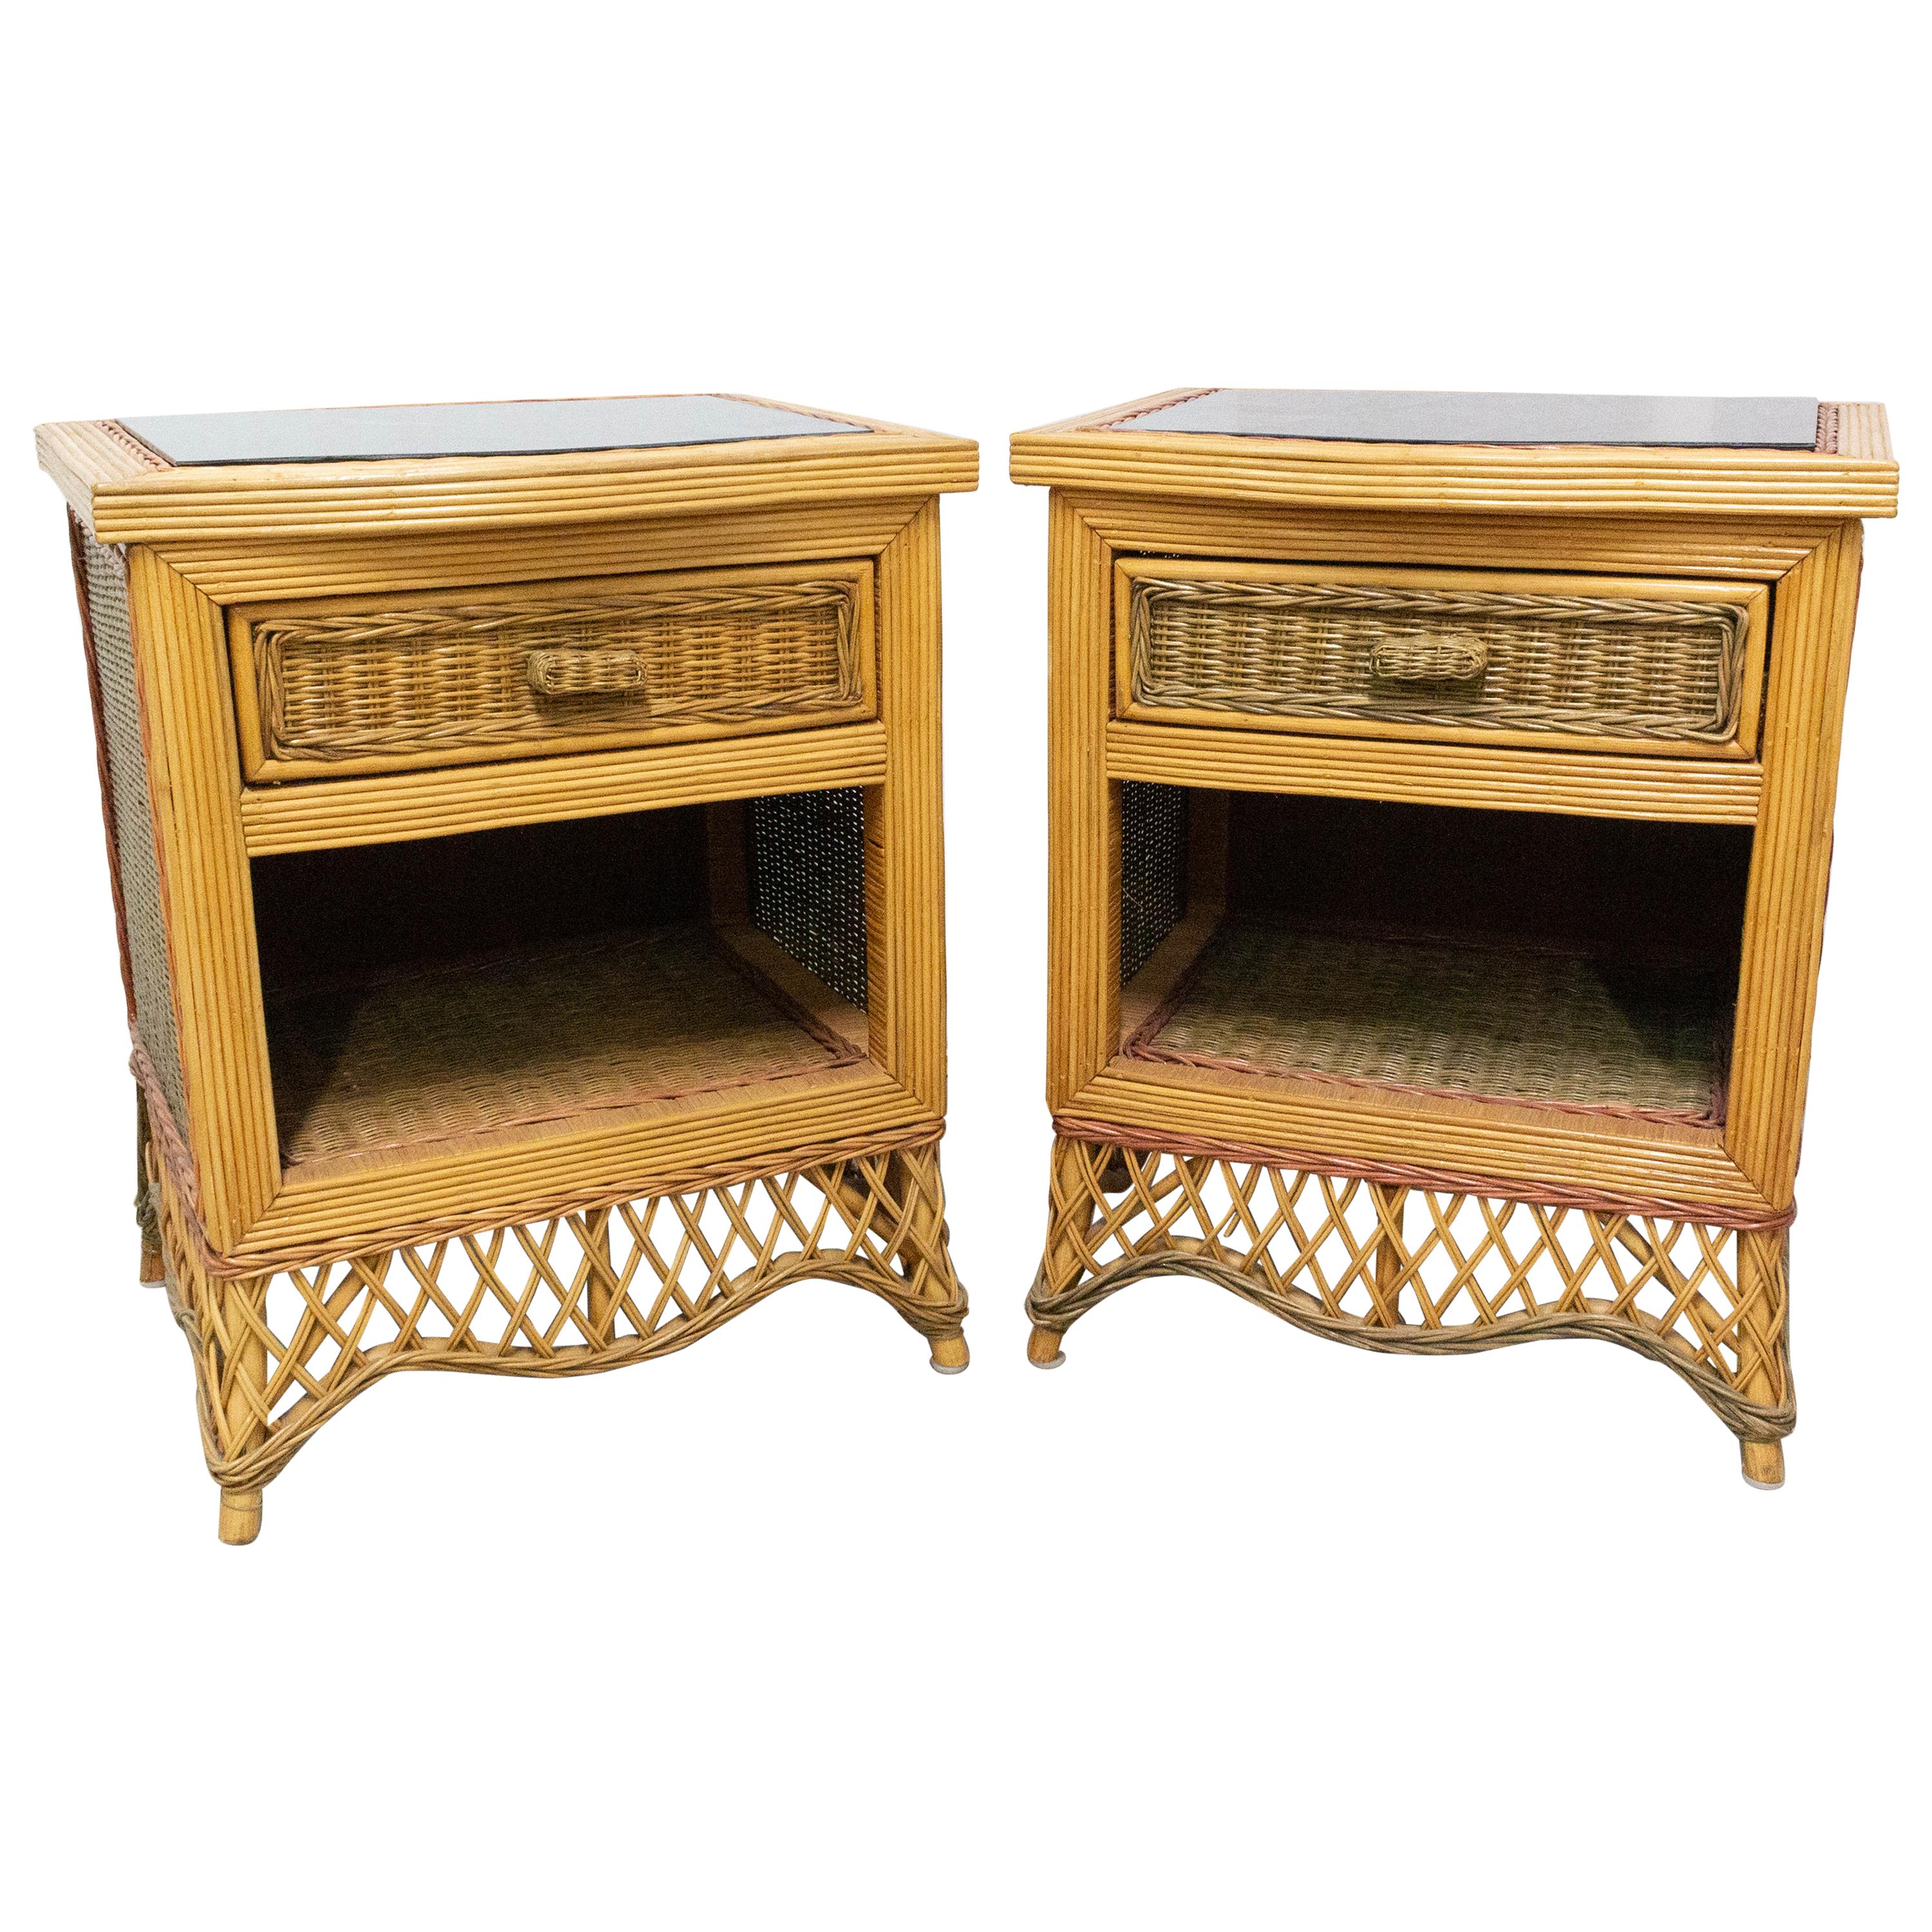 Pair of Rattan Nightstands Mirror Top Side Cabinets Bedside Tables, French